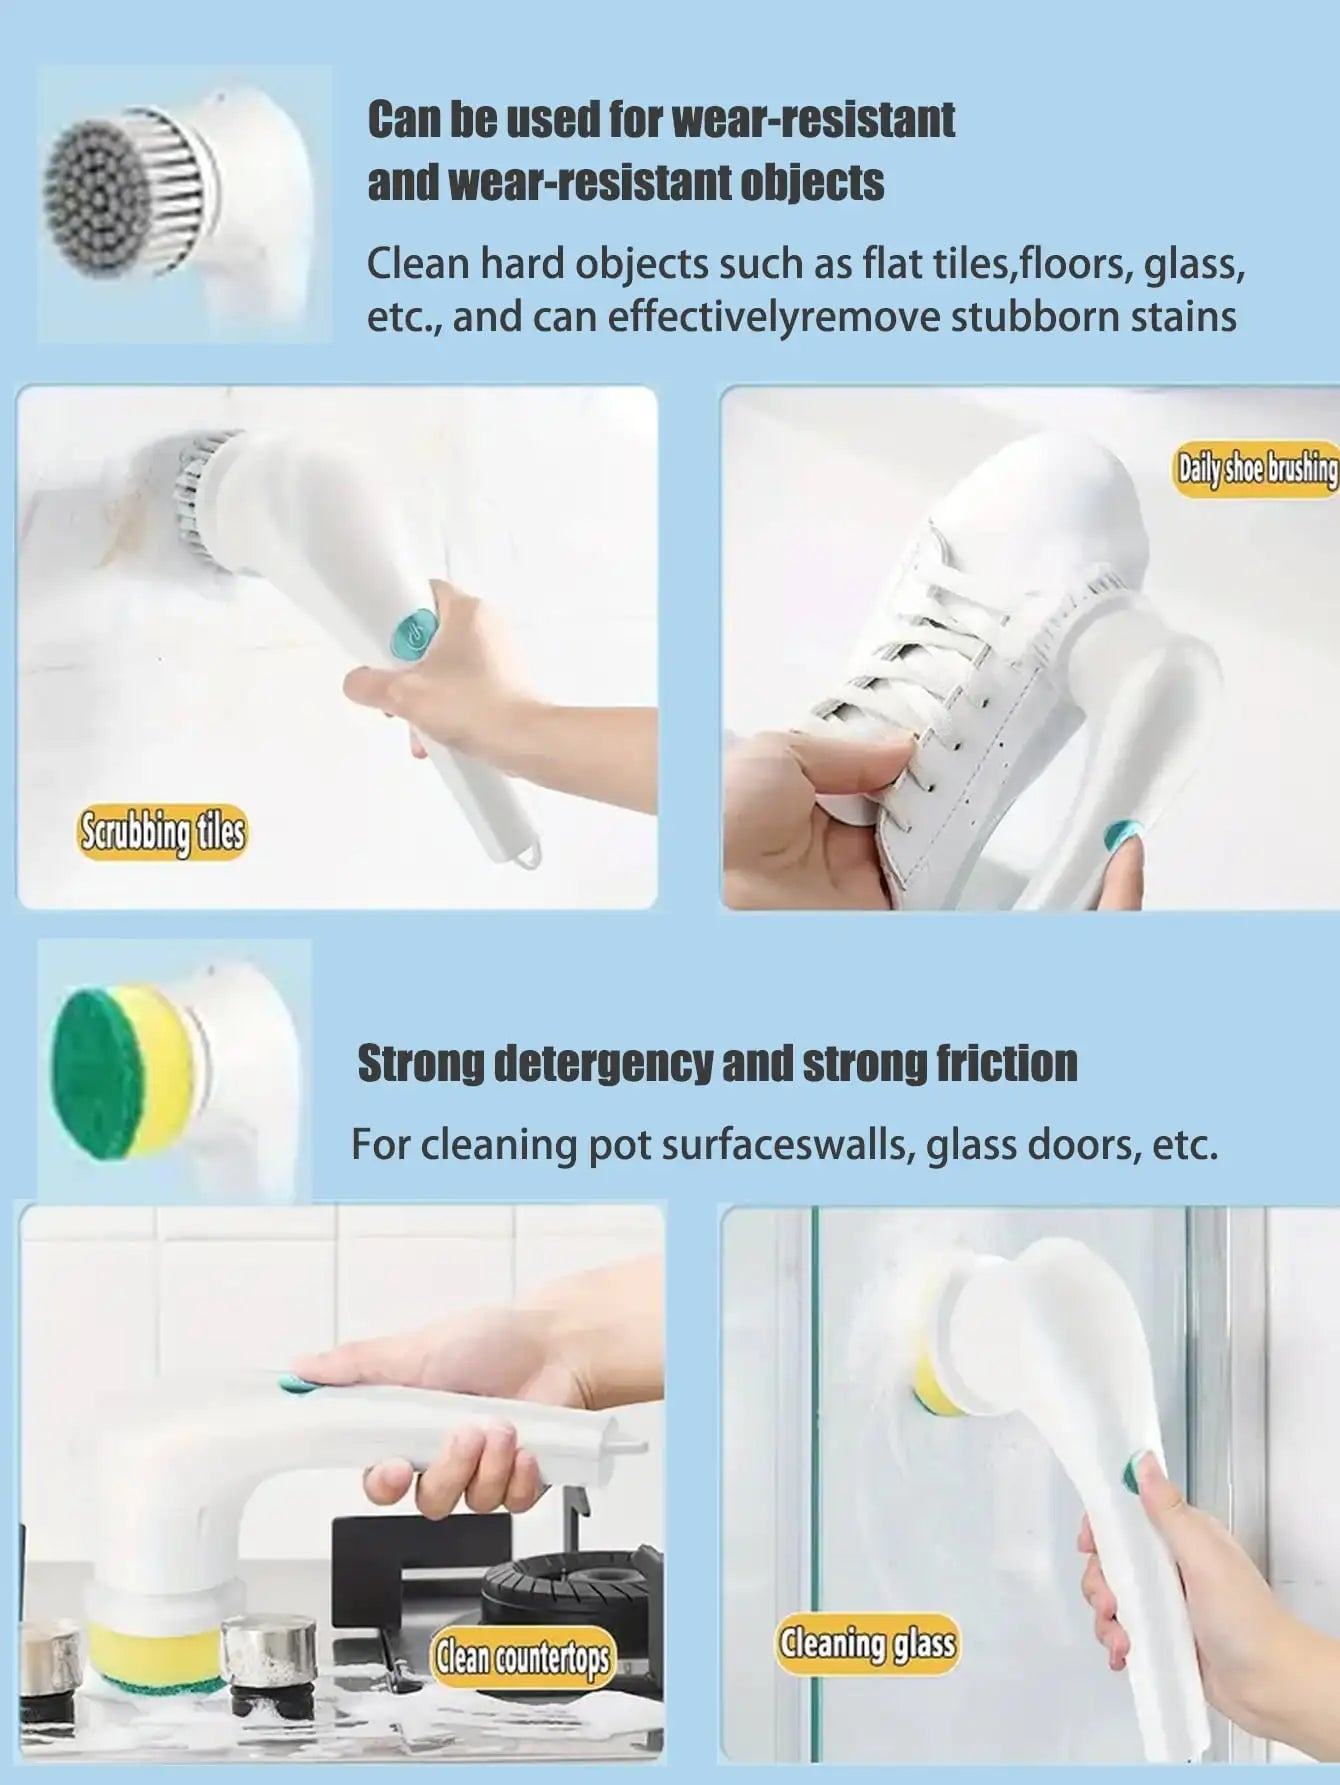 7 in 1 Electric Cleaning Tool Magic Brush Pro – Pure Polly